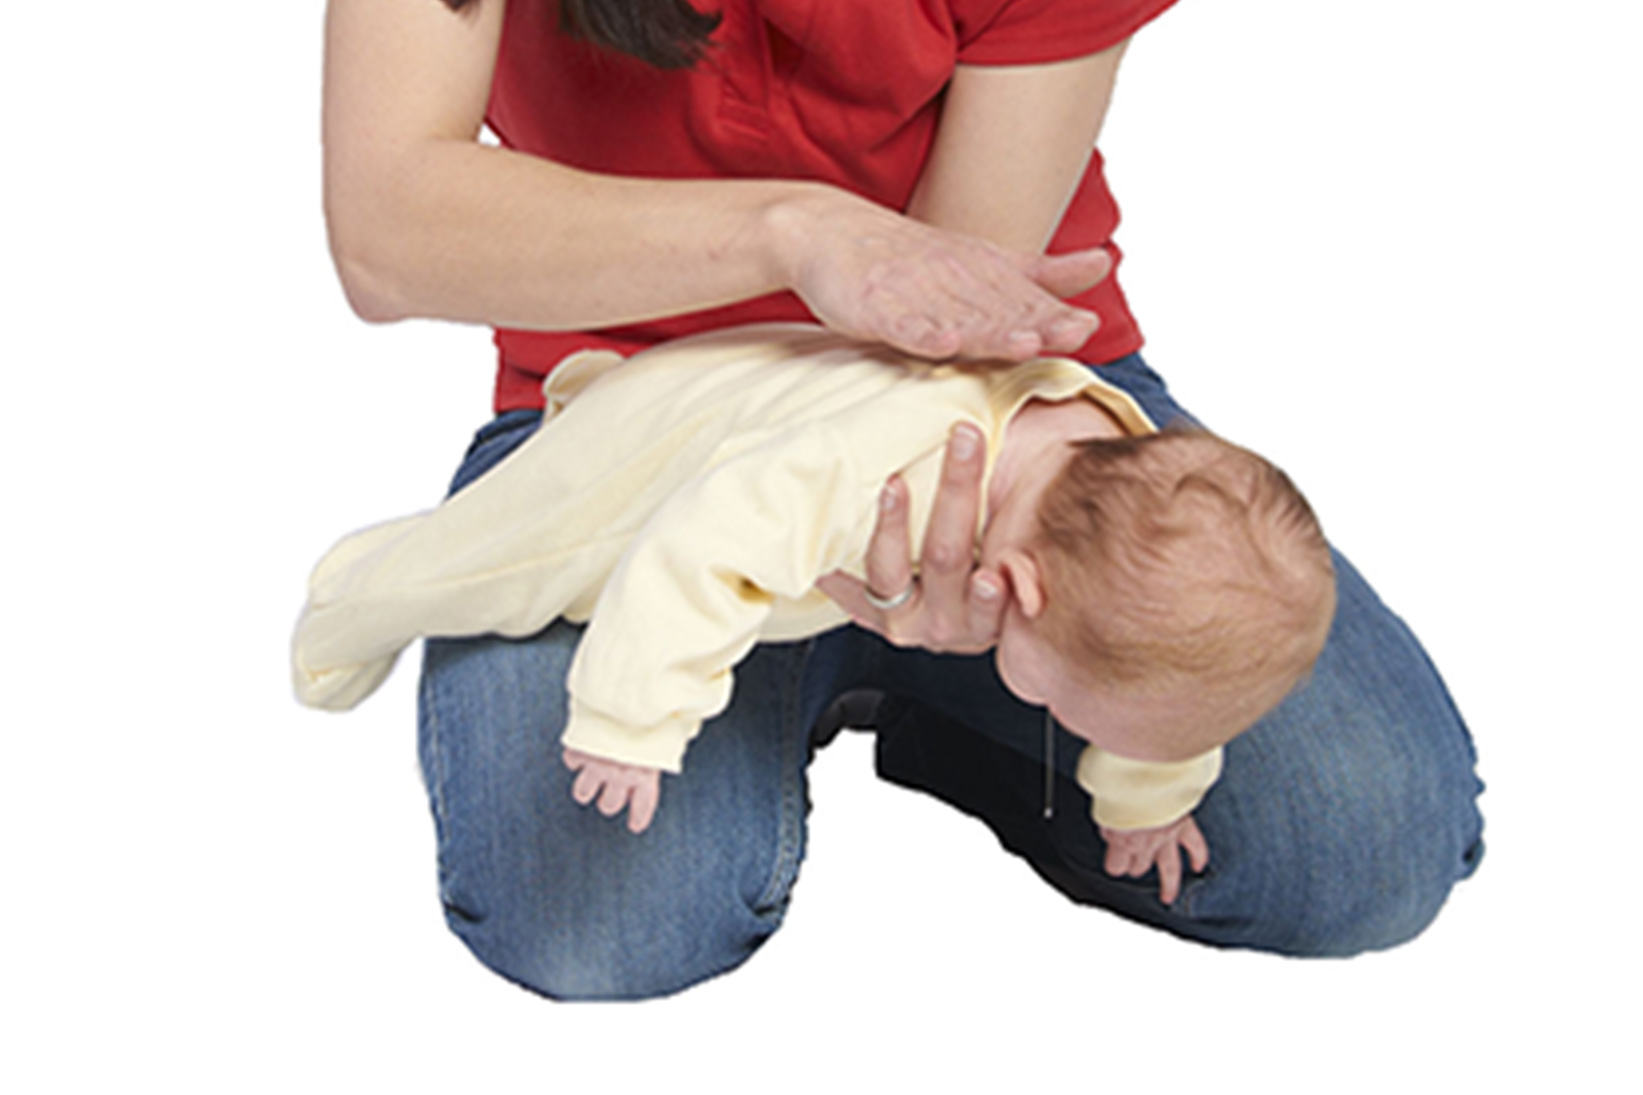 Paediatric First Aid Training Courses RQF Accredited